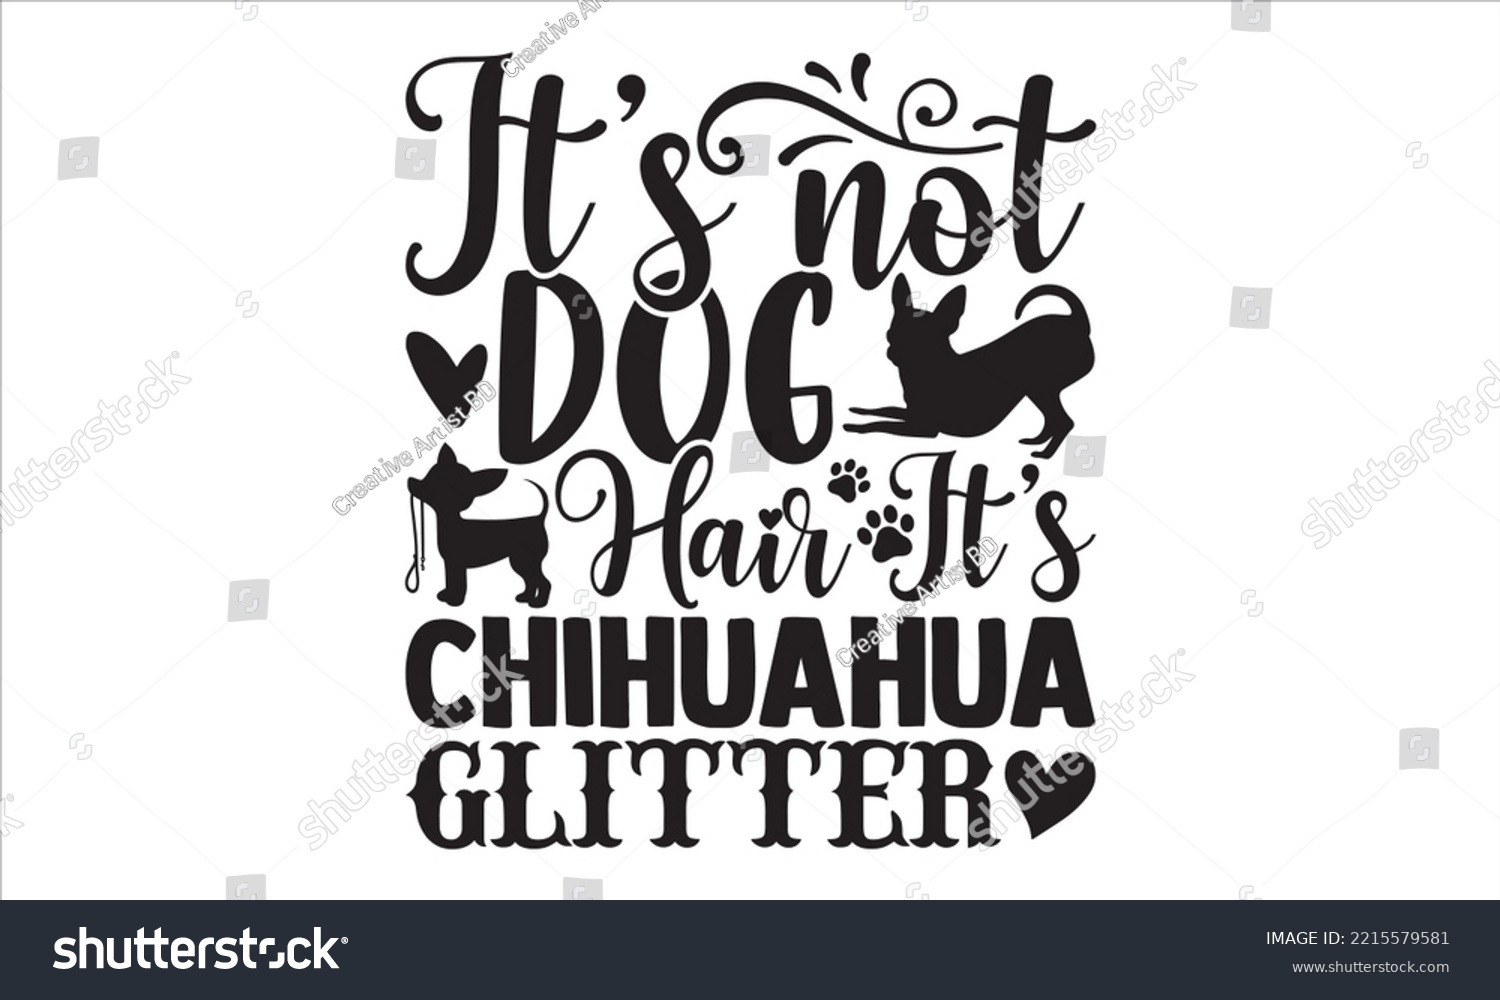 SVG of It’s Not Dog Hair It’s Chihuahua Glitter - Chihuahua T shirt Design, Modern calligraphy, Cut Files for Cricut Svg, Illustration for prints on bags, posters svg